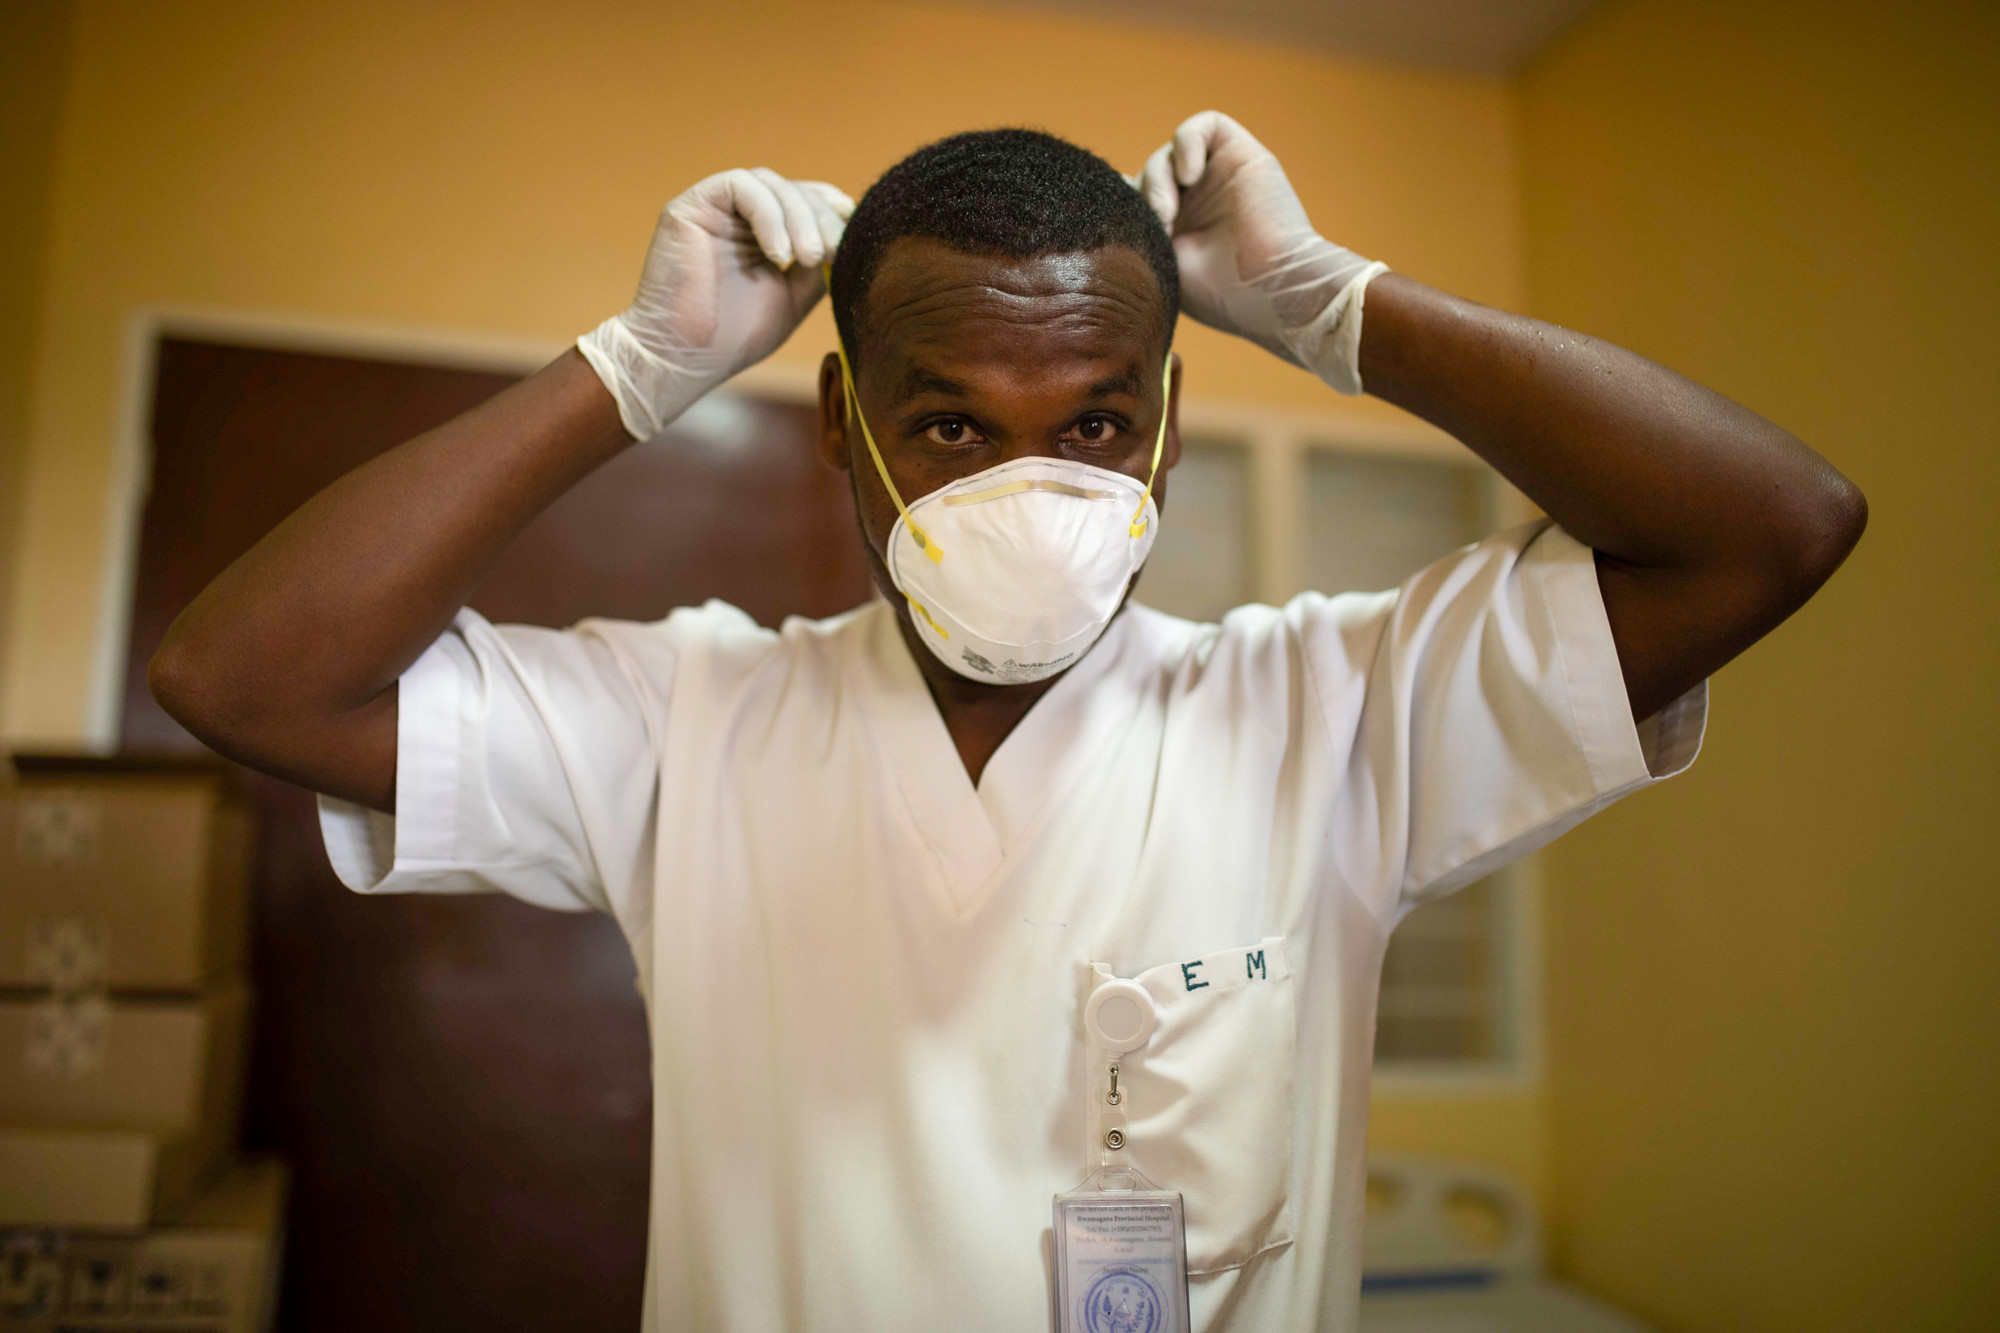 An Ingobyi project health worker in Rwamagana District, Rwanda starts to put on personal protective equipment to care for COVID-19 patients. Photo by Innocent Ishimwe for IntraHealth International.

